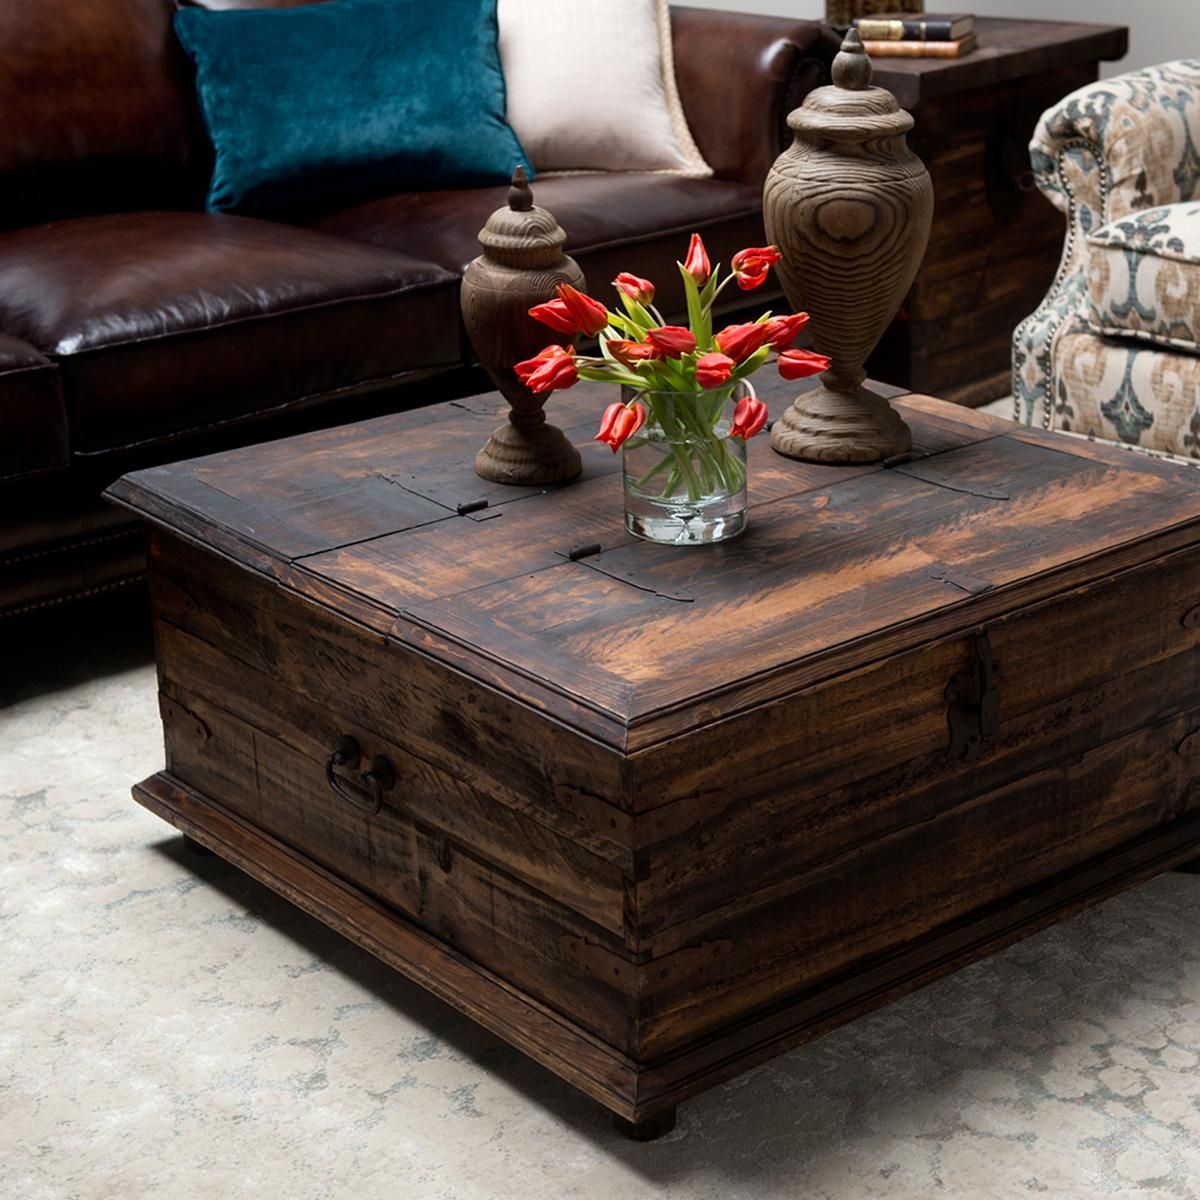 Rustic Trunk Coffee Table For Your Living Room – Homes Furniture Ideas With Rustic Wood Coffee Tables (View 10 of 21)